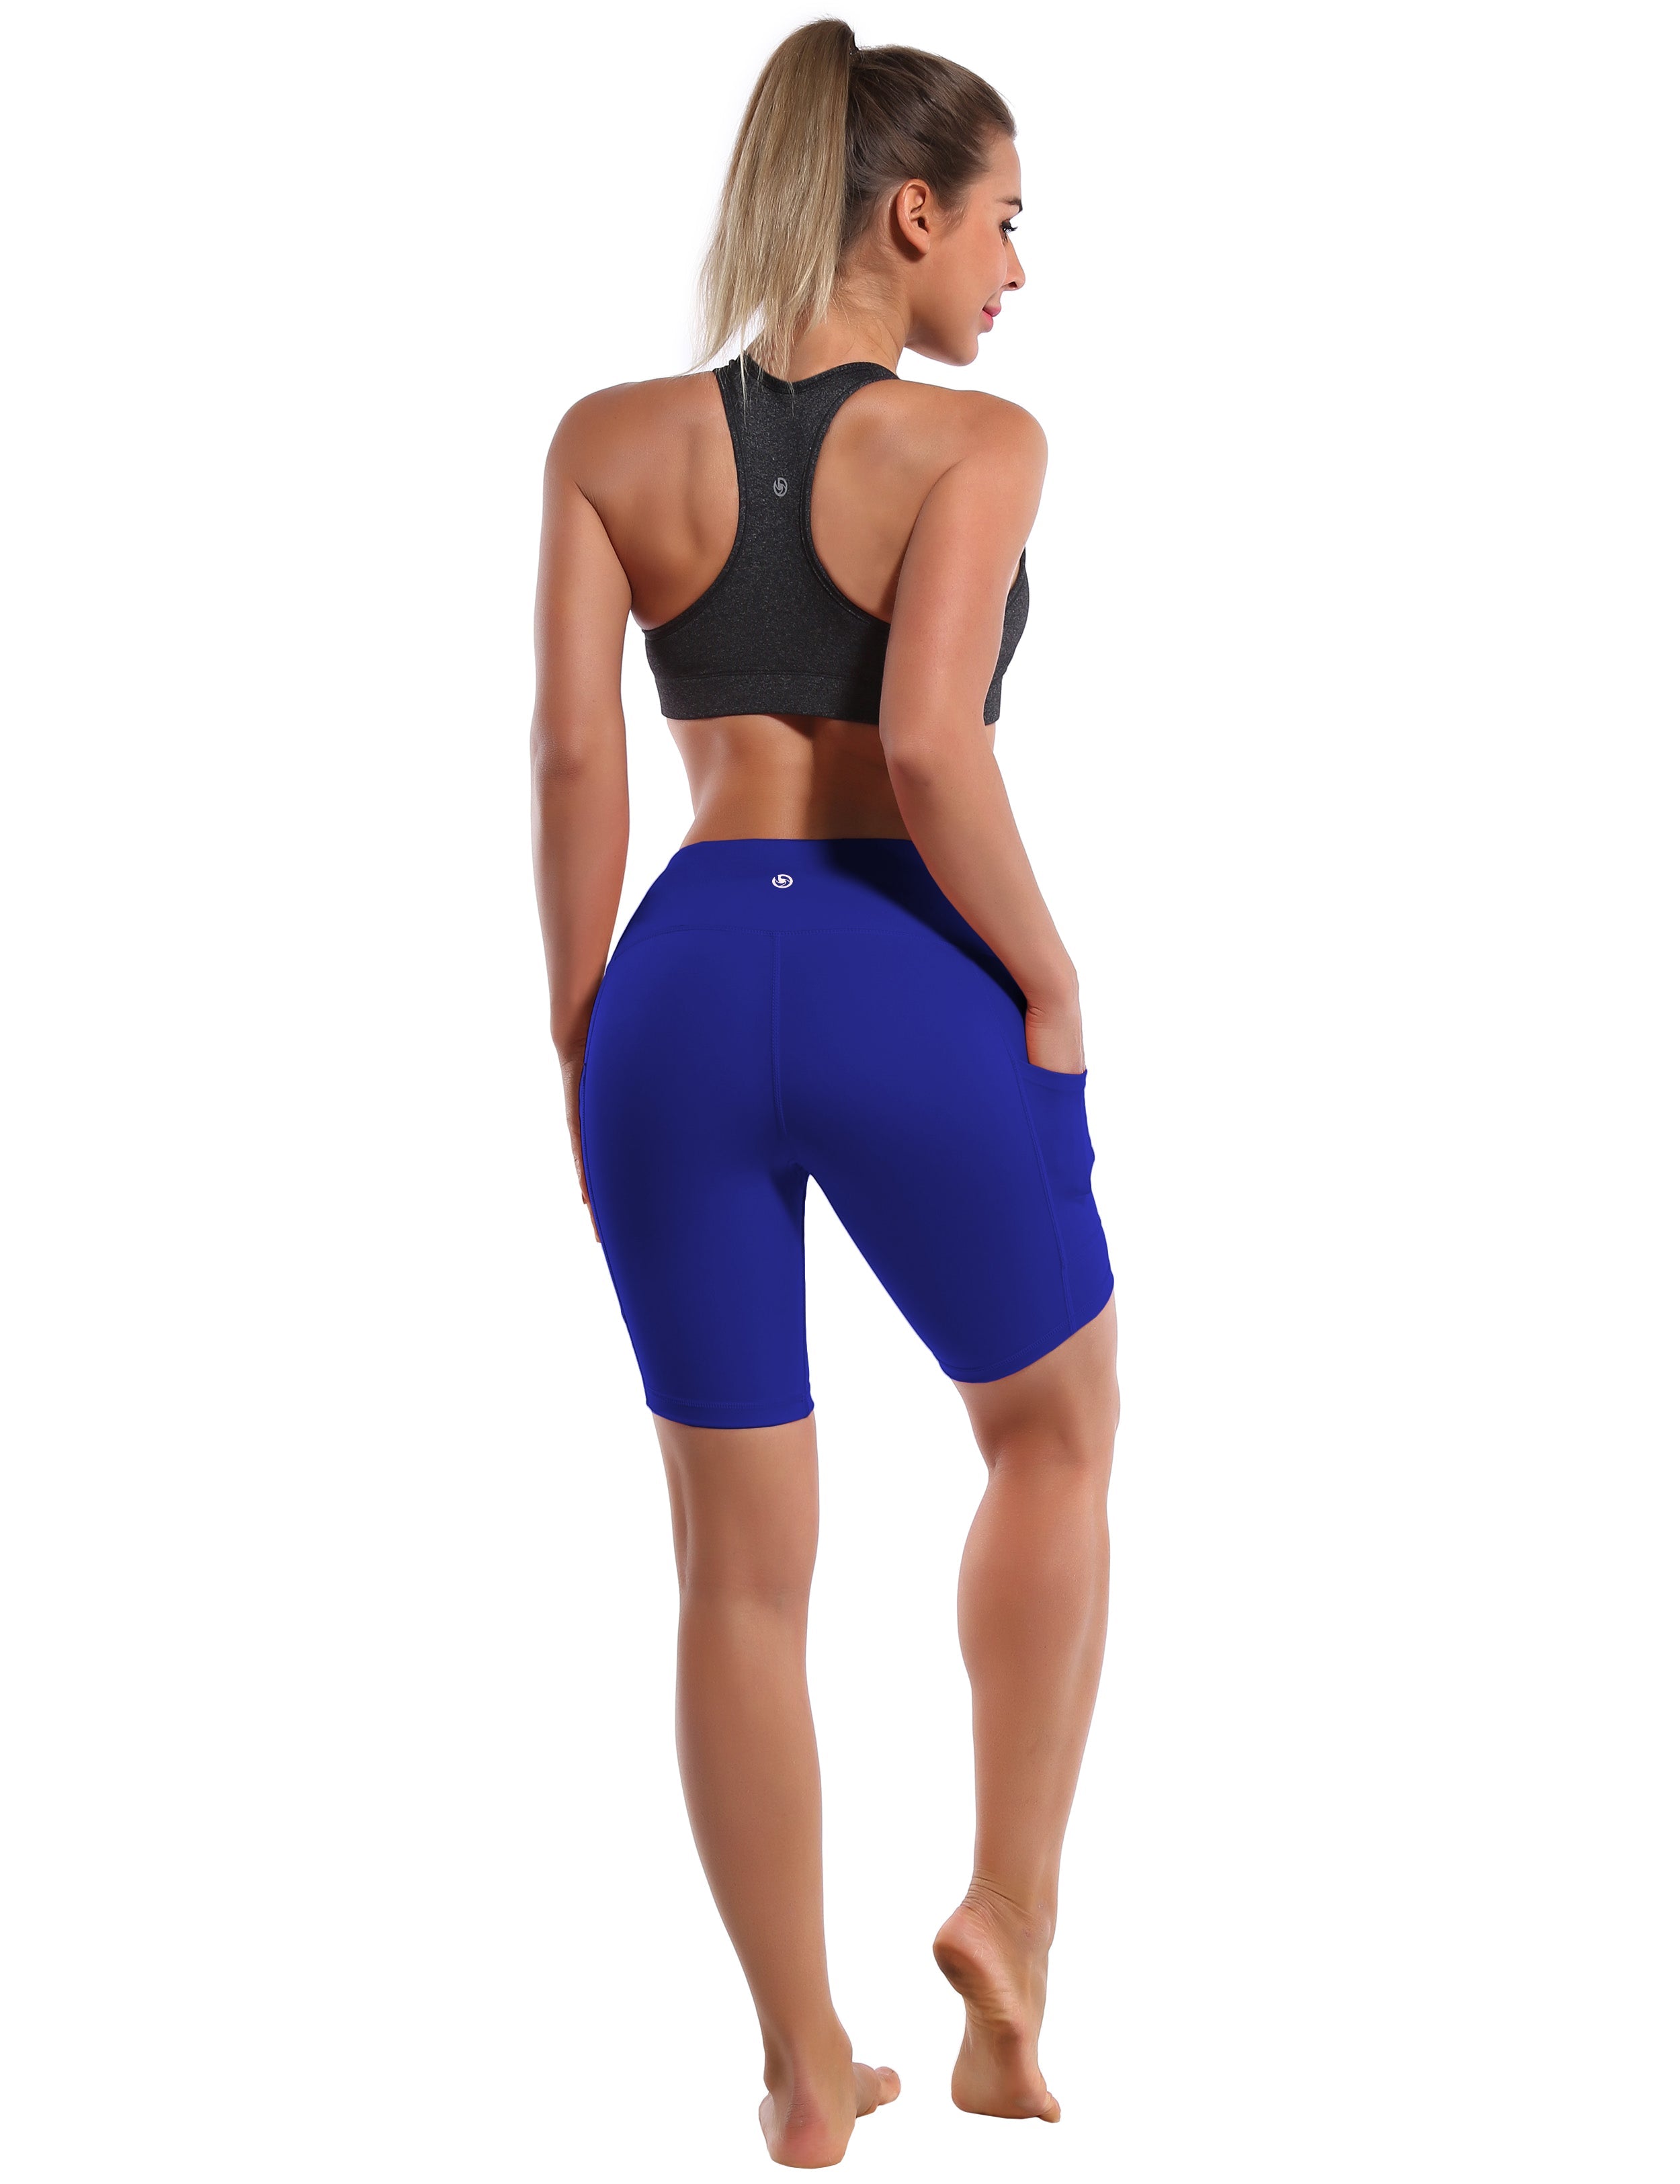 8" Side Pockets Biking Shorts navy Sleek, soft, smooth and totally comfortable: our newest style is here. Softest-ever fabric High elasticity High density 4-way stretch Fabric doesn't attract lint easily No see-through Moisture-wicking Machine wash 75% Nylon, 25% Spandex